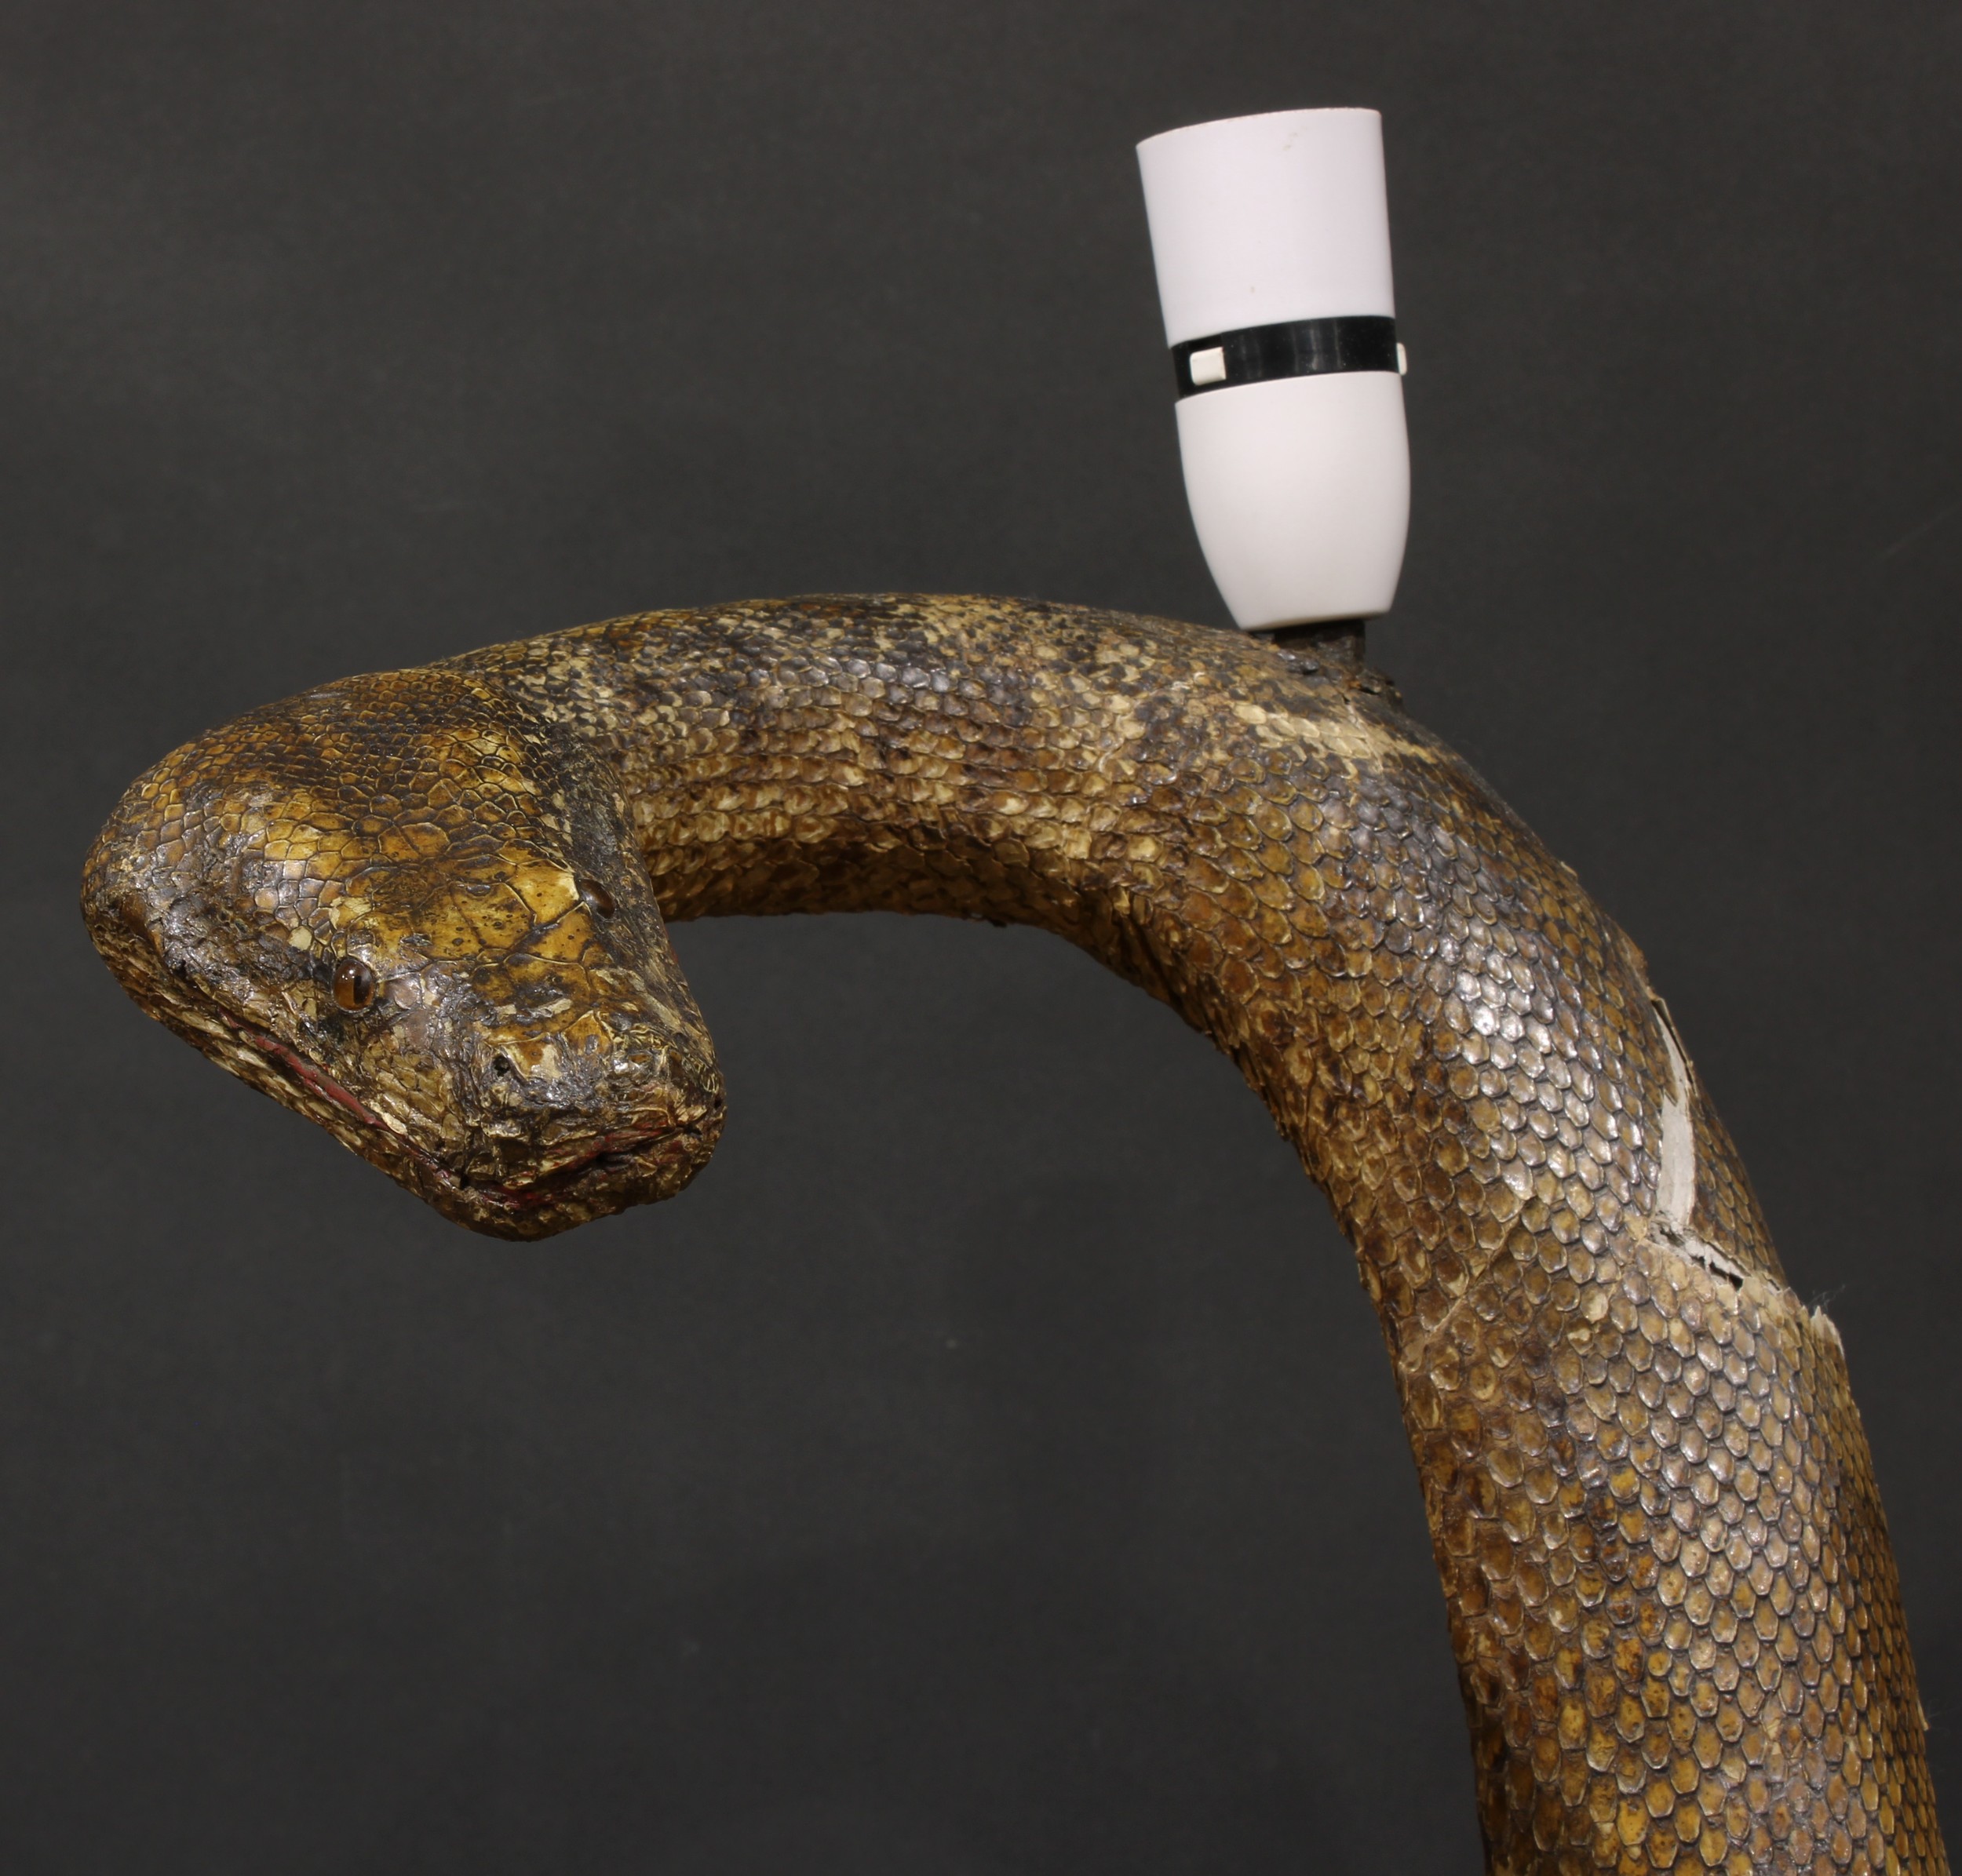 Taxidermy - an ophiological floor lamp, African rock python snake, 167cm high overall - Image 2 of 2